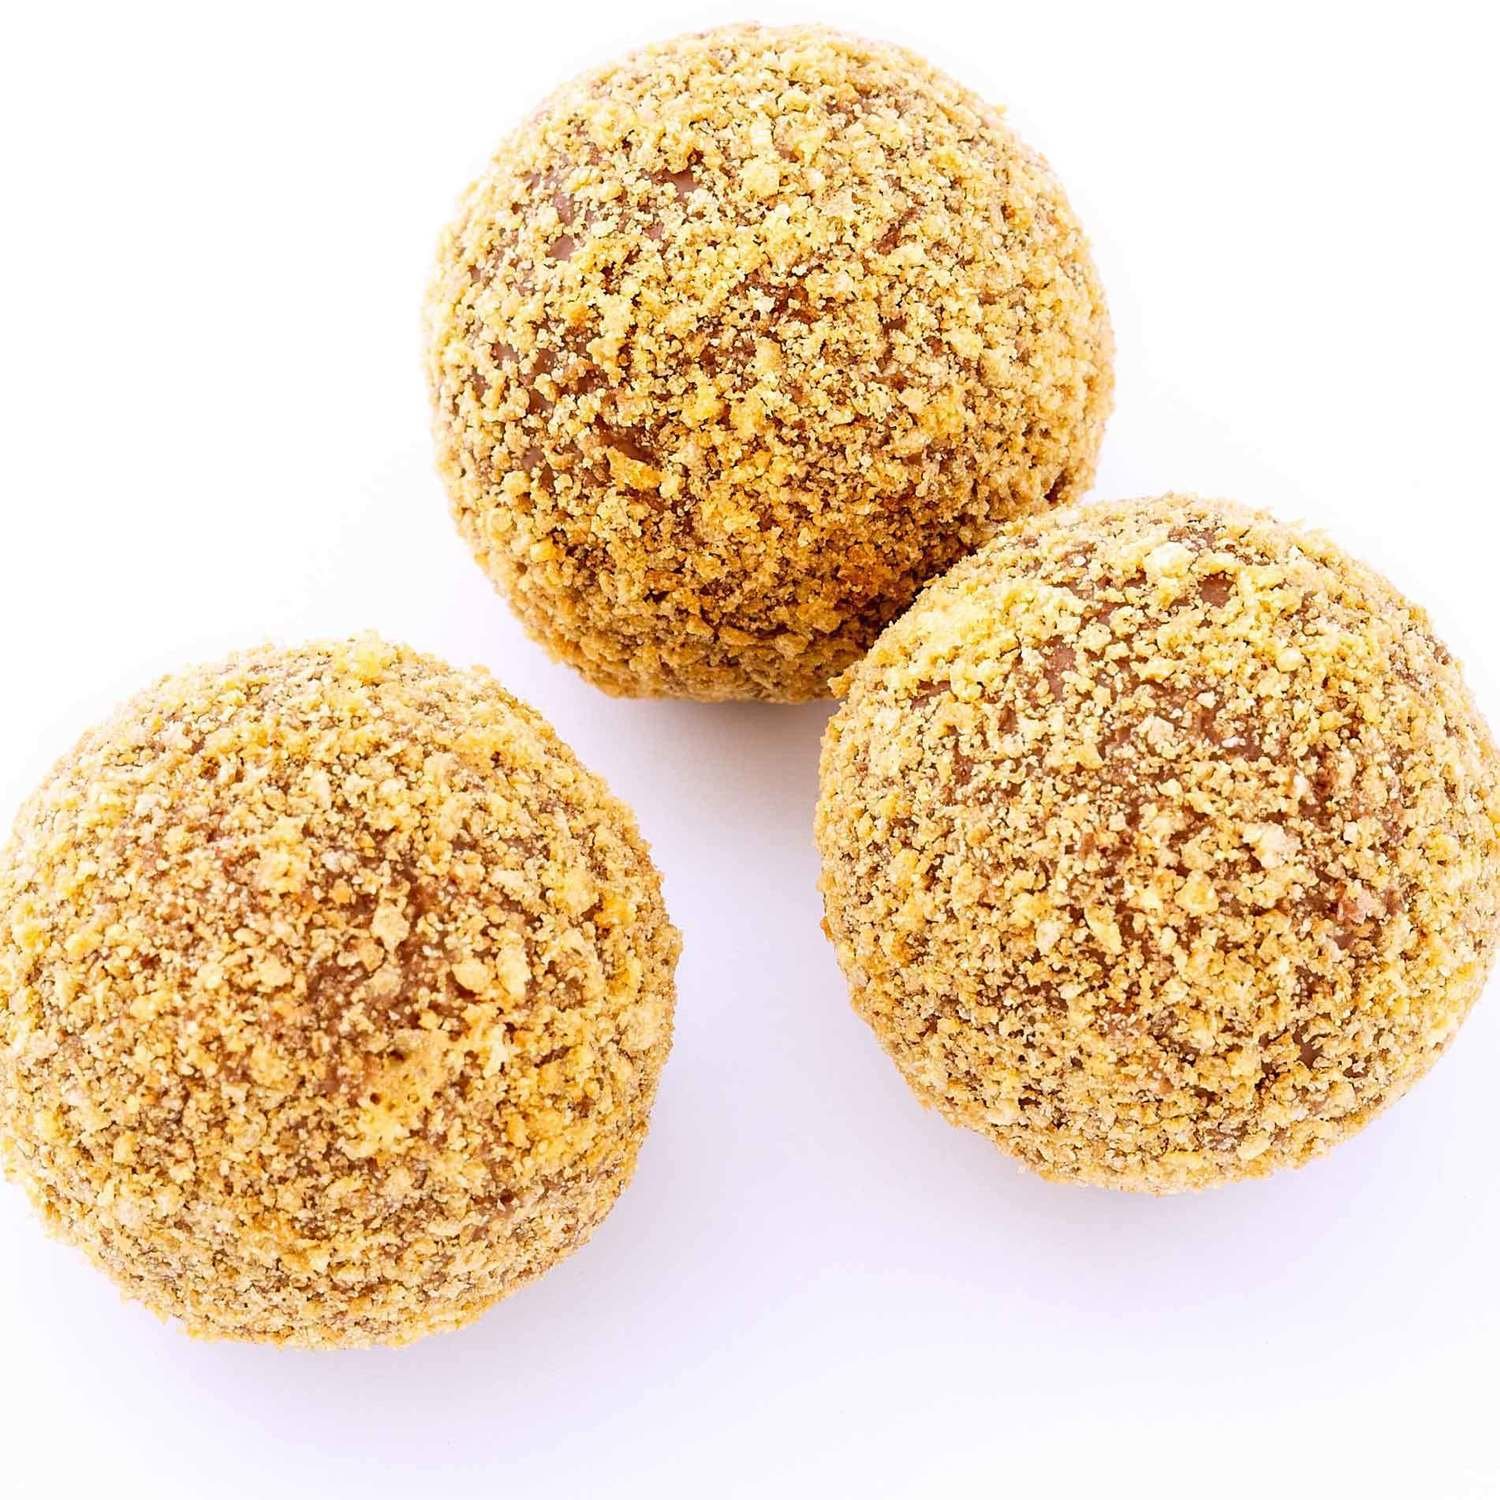 Rock Salt Caramel Truffles - 10 pieces - hand-made caramel made with real butter and real vanilla, in milk chocolate shells, coated in crushed paté feuilletée